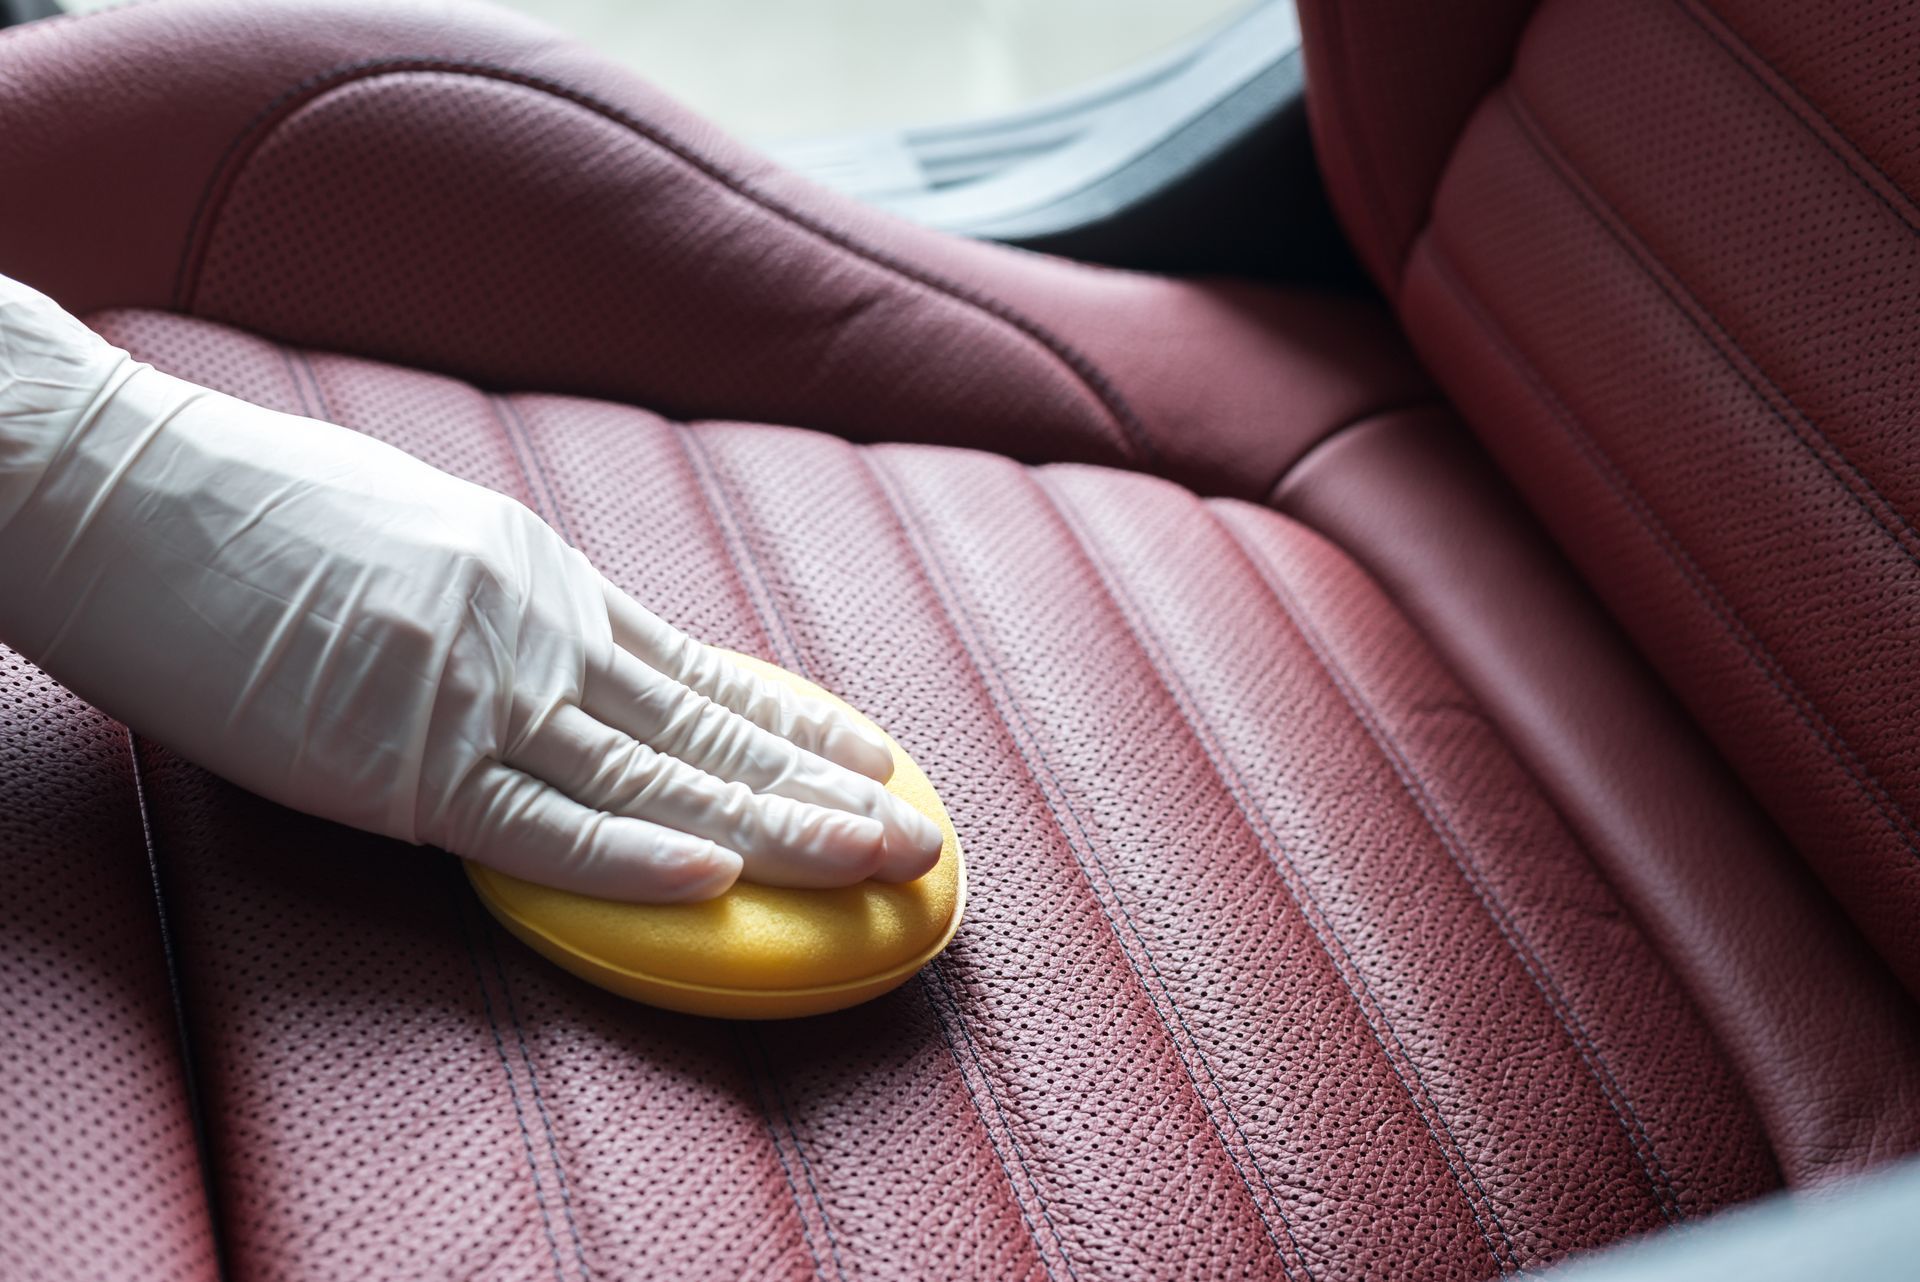 a person is cleaning a red leather car seat with a yellow sponge .